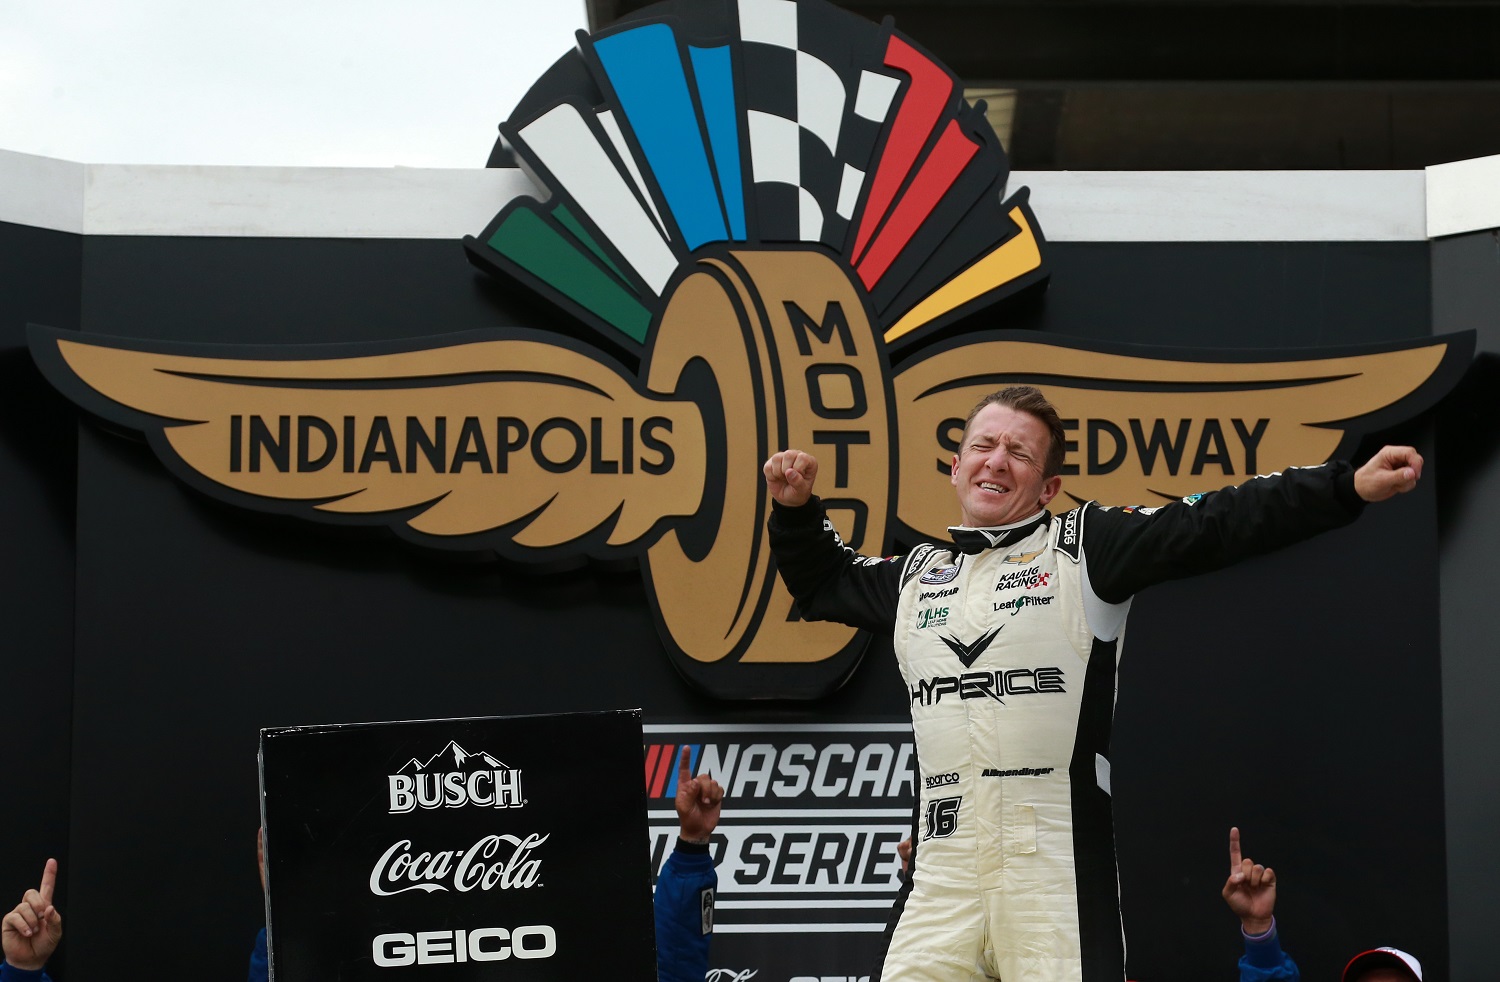 AJ Allmendinger celebrates in victory lane after winning the NASCAR Cup Series Verizon 200 at the Brickyard at Indianapolis Motor Speedway. | Sean Gardner/Getty Images